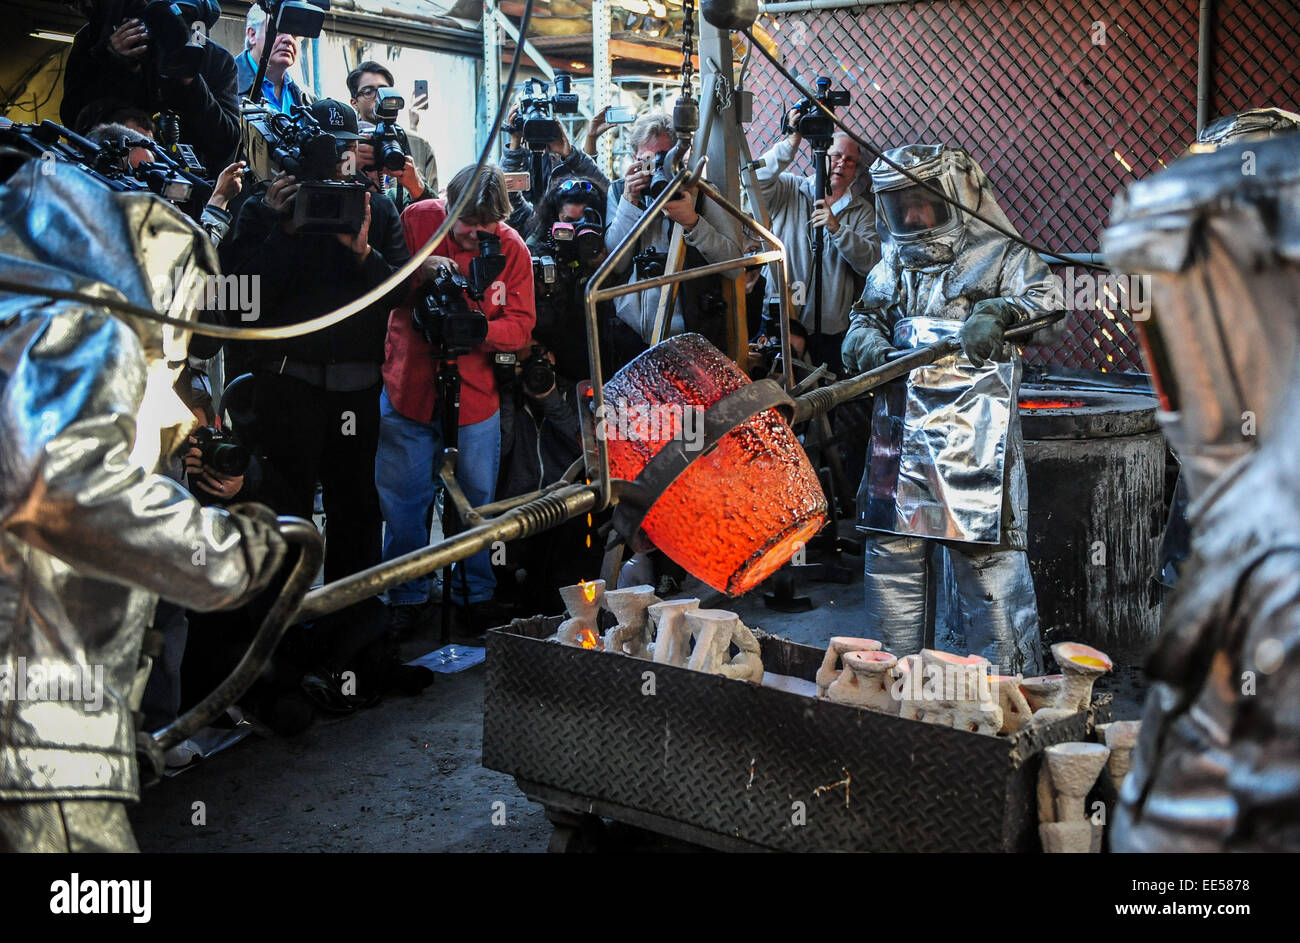 (150114) -- BURBANK, Jan. 14, 2015 (Xinhua) -- Workers pour molten bronze into molds during a media event to display the production of the bronze statuette awards for the 21st annual Screen Actors Guild (SAG) Awards in Burbank, California, the United States, on Jan 13, 2015. The statuette, known as 'The Actor', was originally designed by Jim Heimann and Jim Barrett, and sculpted by Edward Saenz. It is 16 inches (40.6 cm) tall and weighs 12 pounds (5.4 kg). Since the 1st SAG Awards in 1995, the awards have been produced by the American Fine Arts Foundry in Burbank. The 21st SAG Award ceremony w Stock Photo